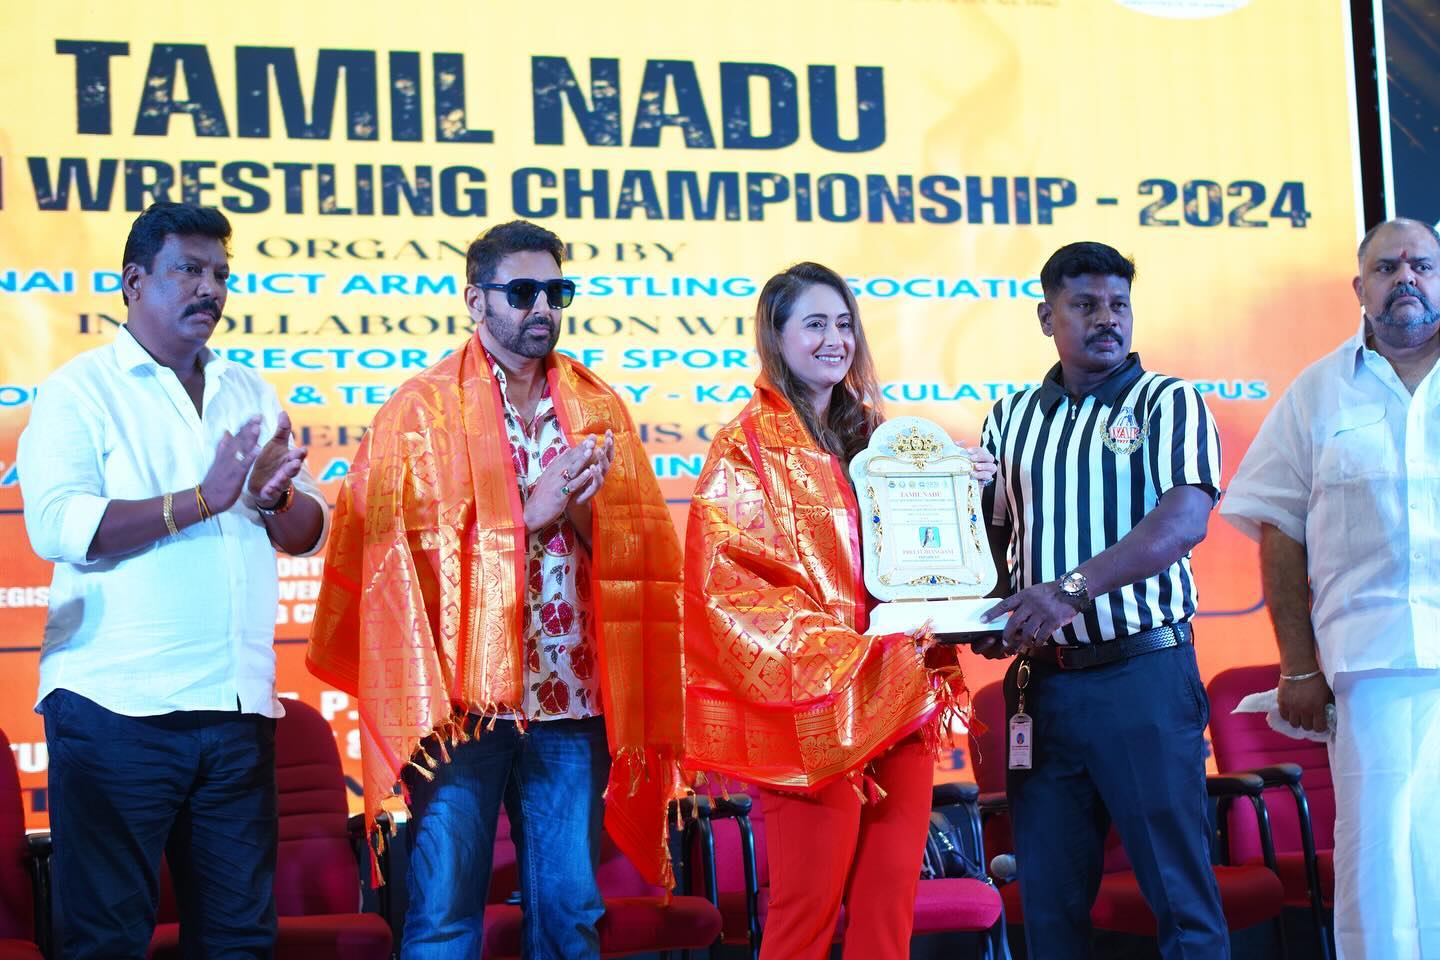 Great to witness the Tamil Nadu State ArmWrestling Championship over the weekend…the sport of panja/ArmWrestling is spreading rapidly across the country ✊🏼
Thank you to @__armwrestling.tn__ @_armwrestling.chennai_